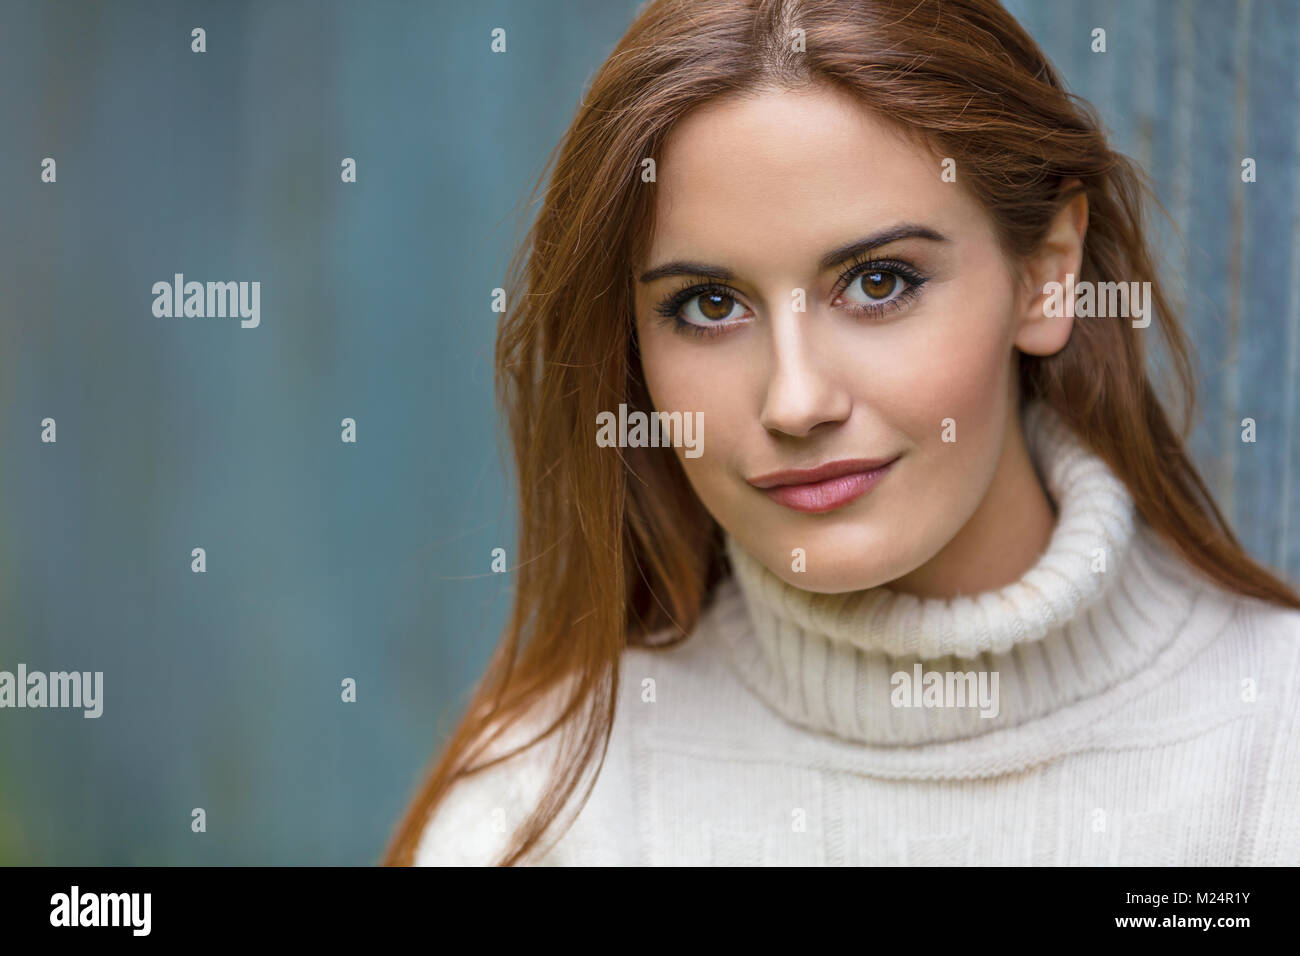 Outdoor portrait of beautiful girl or young woman with red hair wearing a white jumper Stock Photo